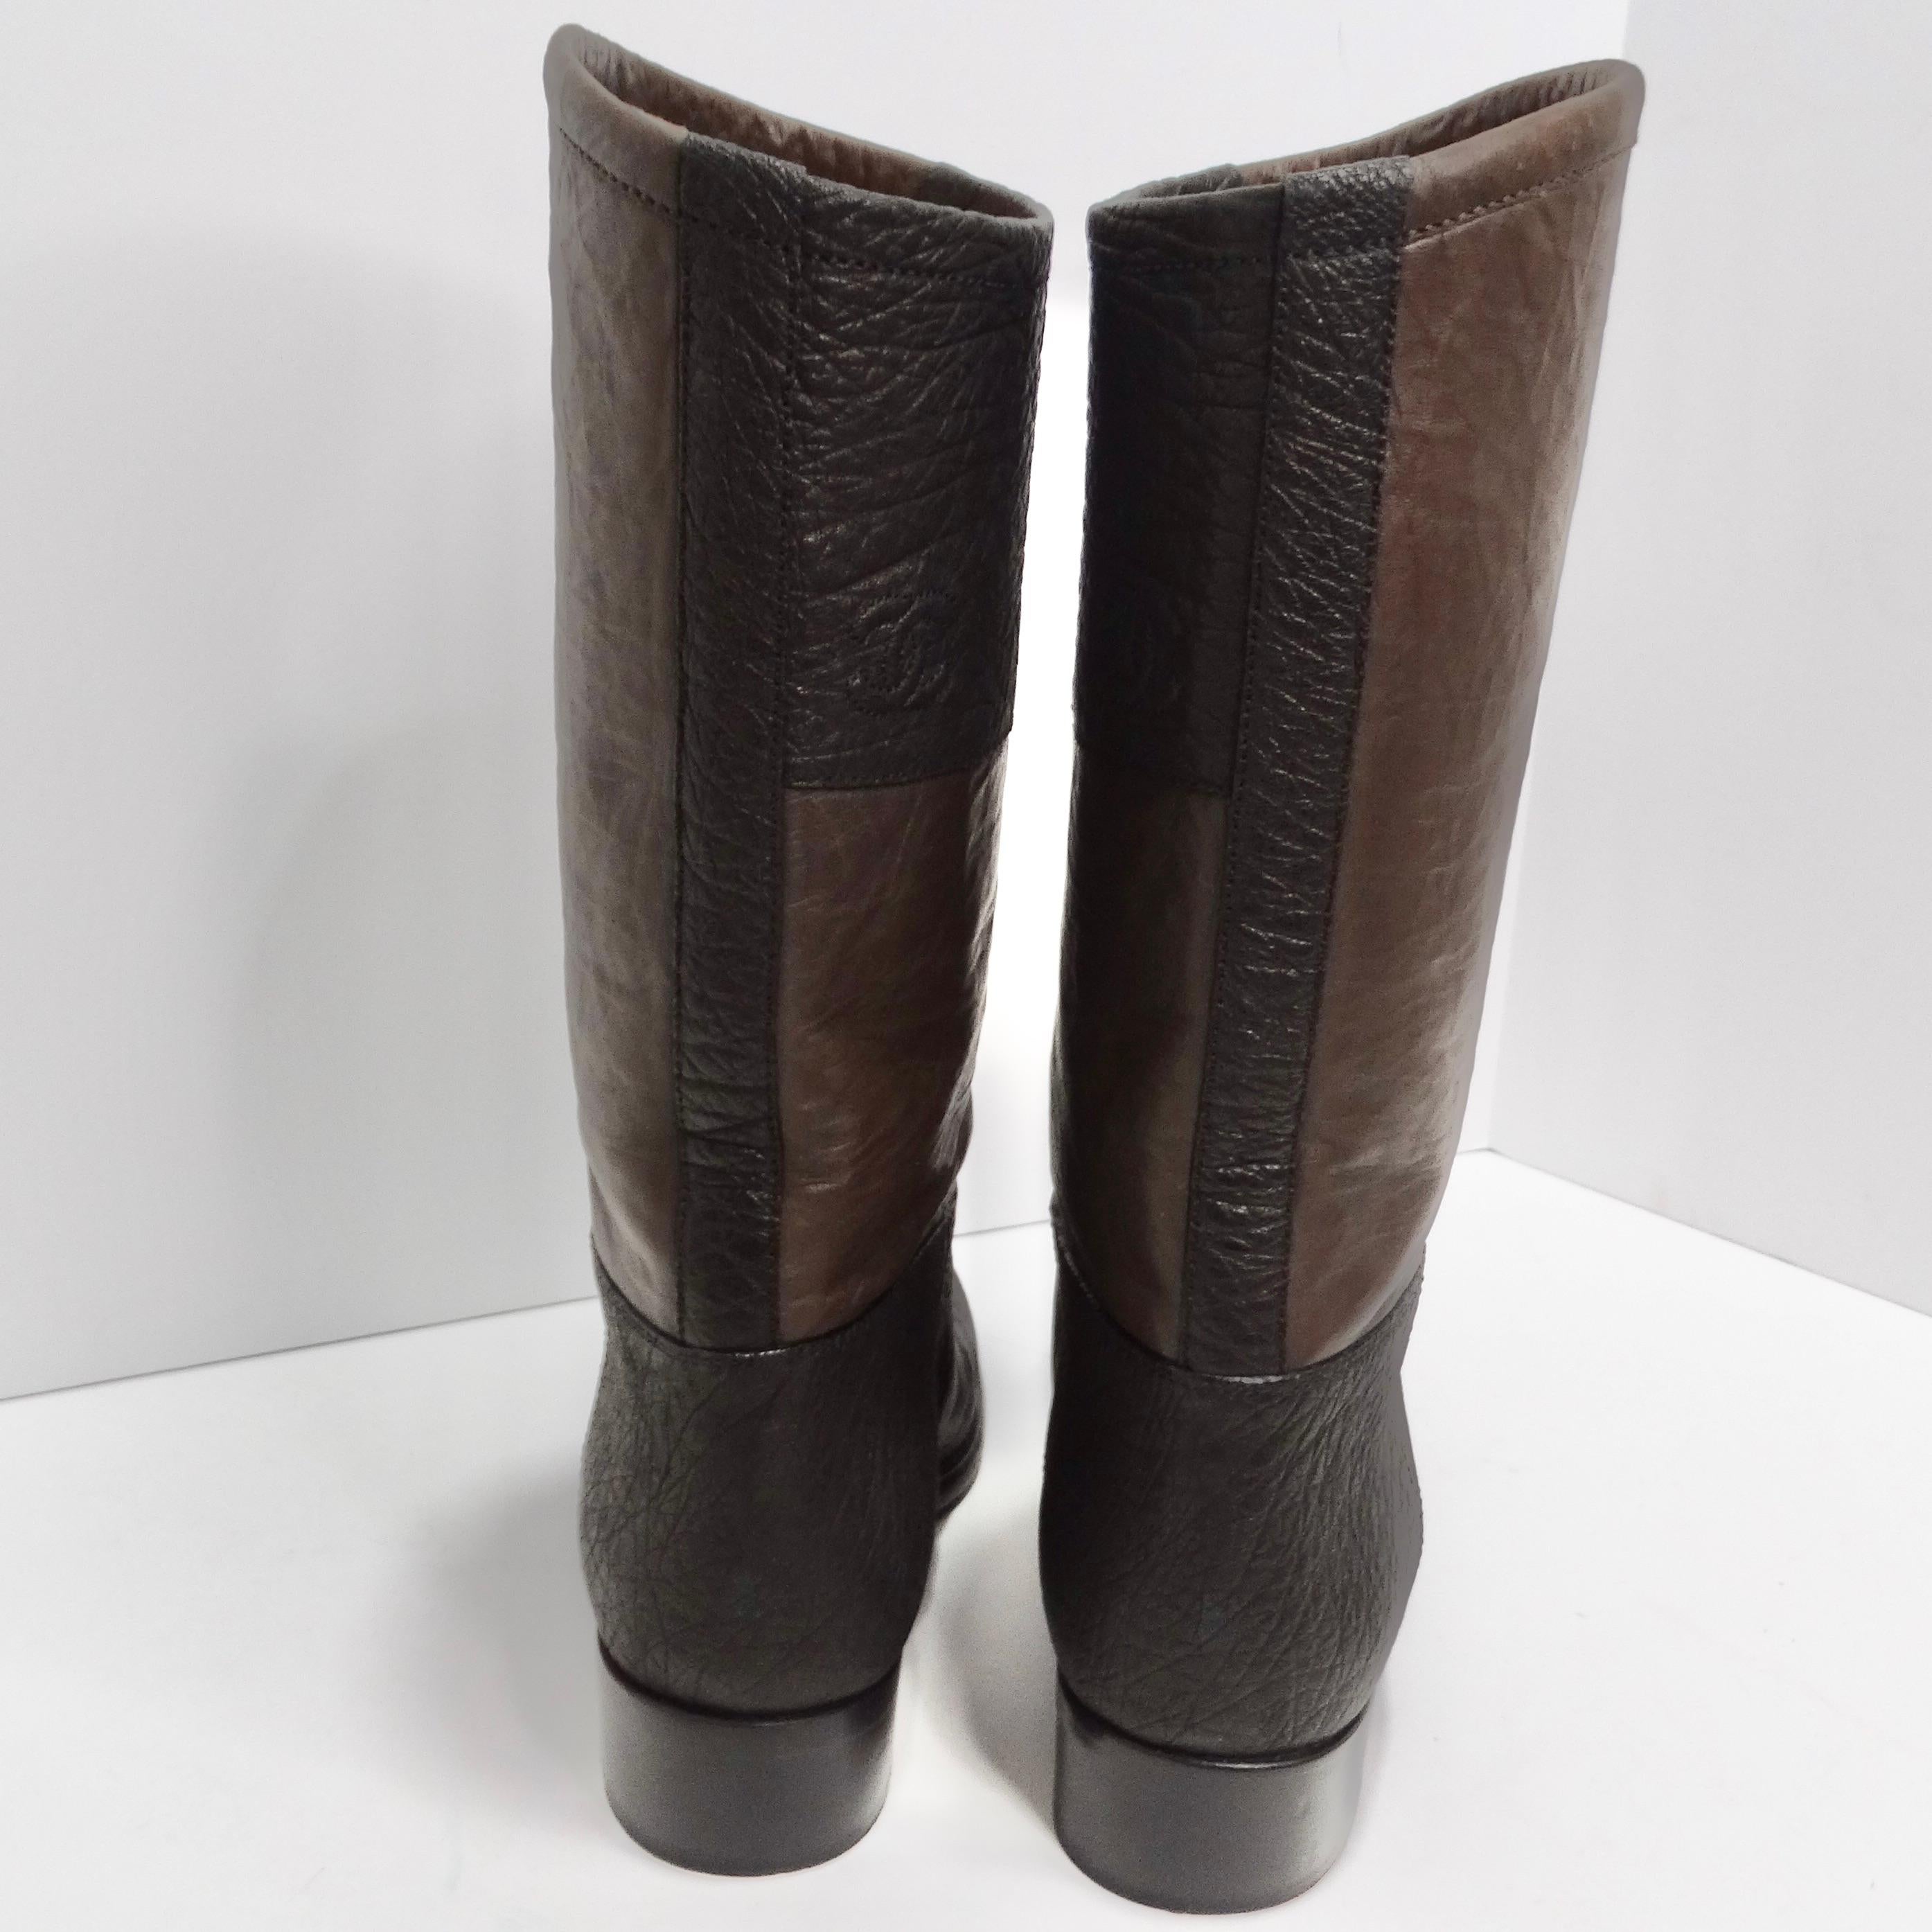 Chanel Two Tone Interlocking C Riding Boots In Good Condition For Sale In Scottsdale, AZ